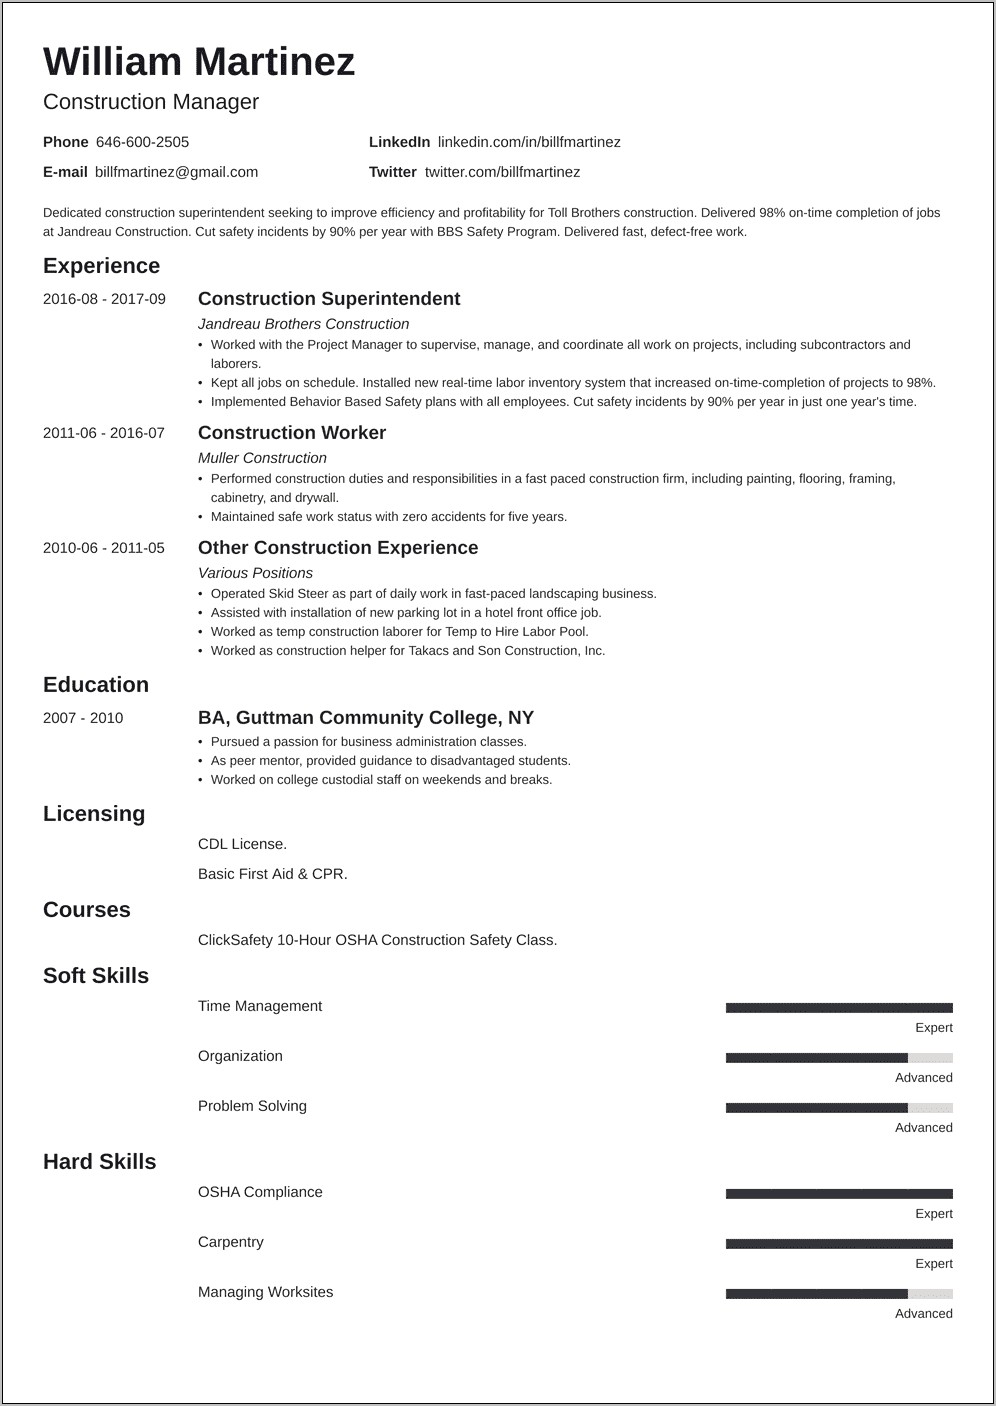 Sample Resume Of Union Construction Worker